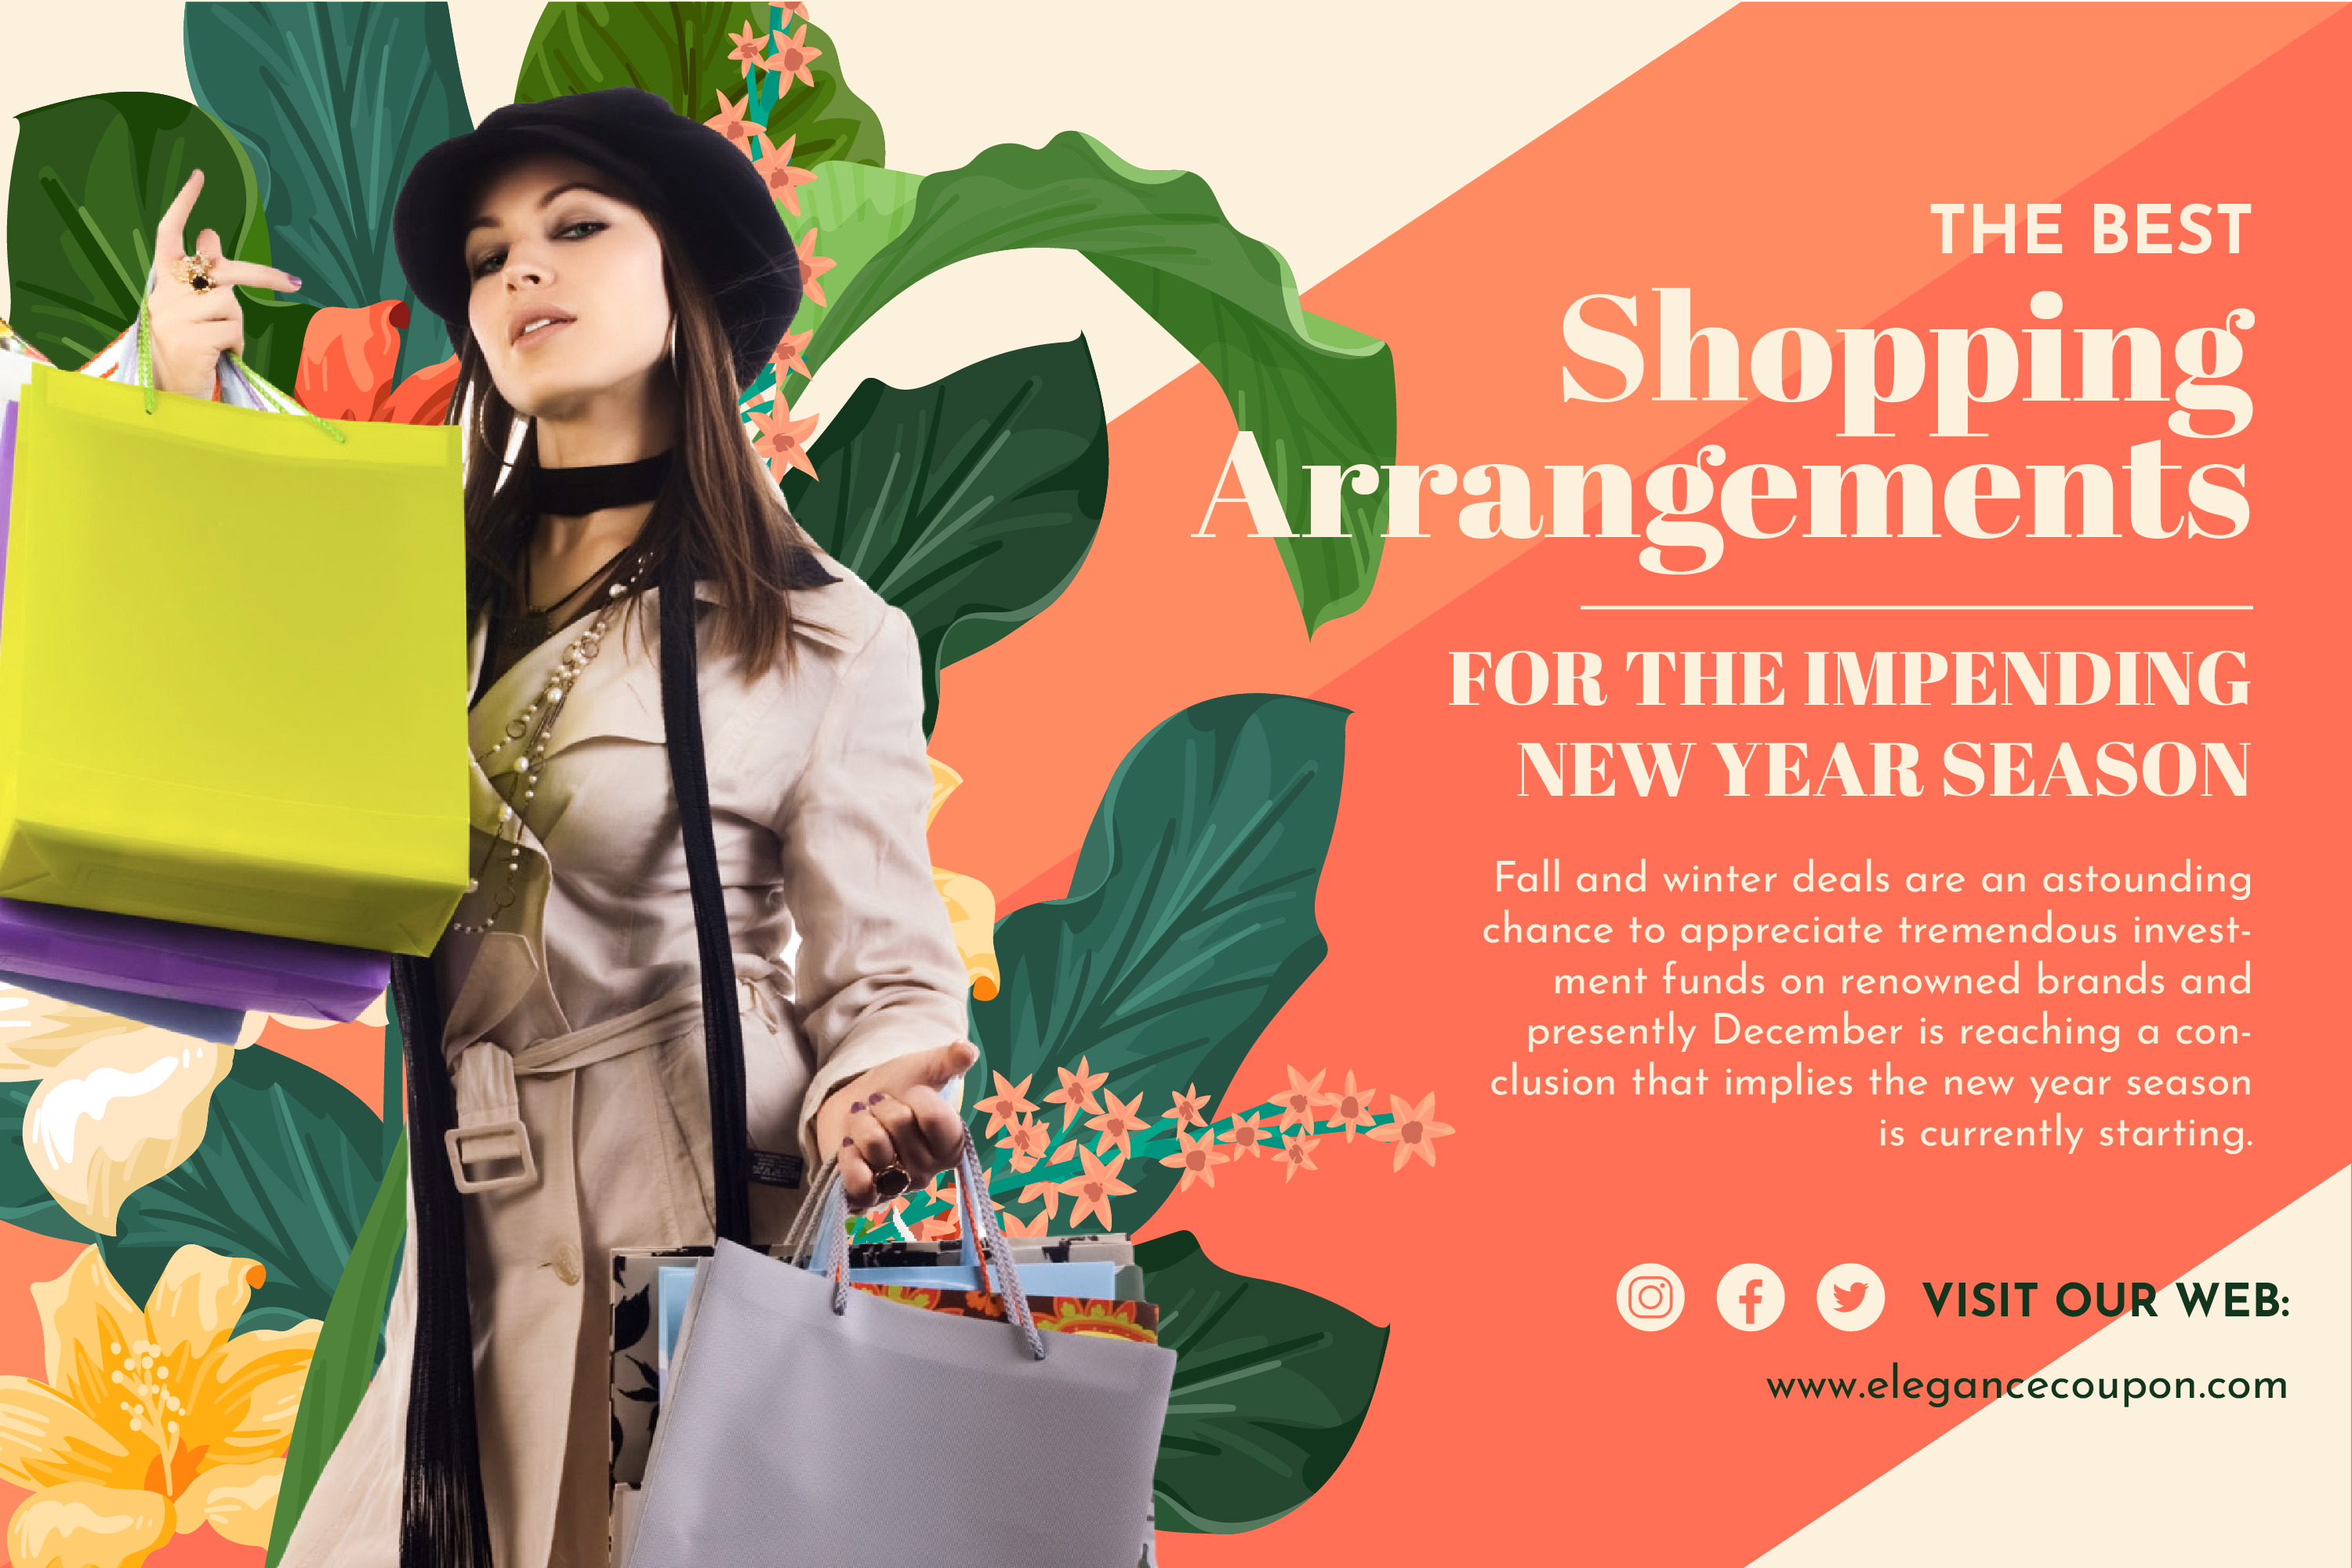 The Best Shopping Arrangements for The Impending New Year Season